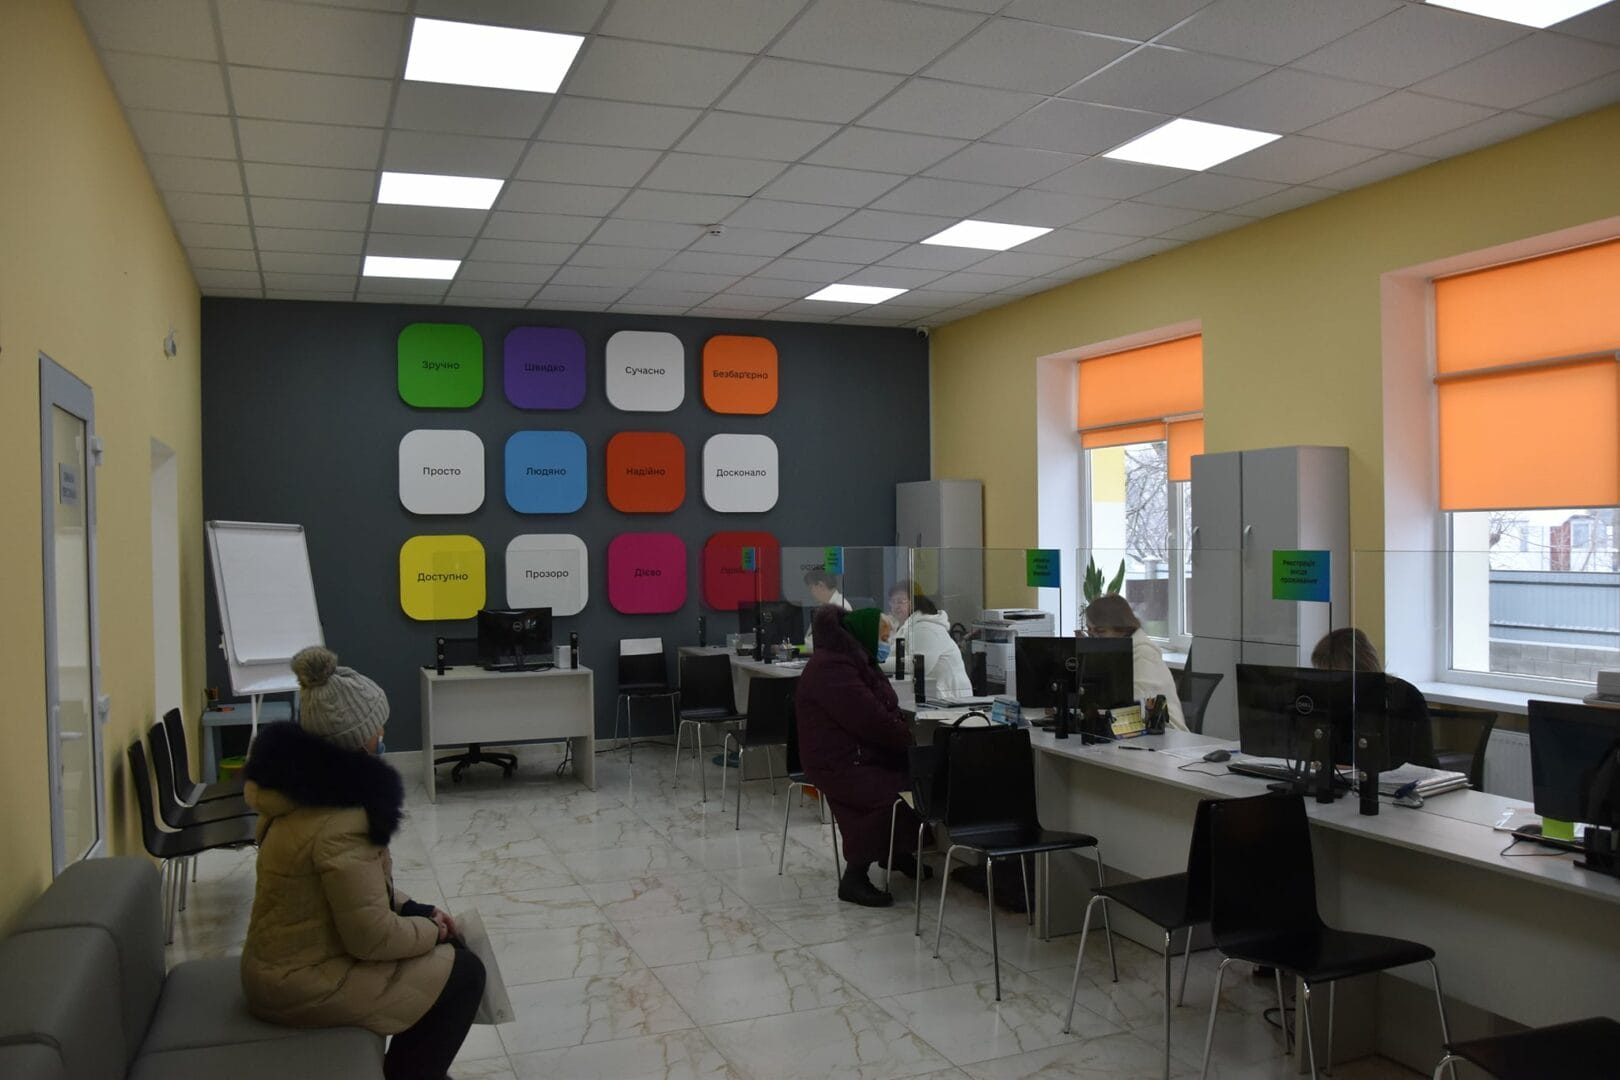 Diia. Centre is a location with a complex of all the necessary administrative services provided to the residents